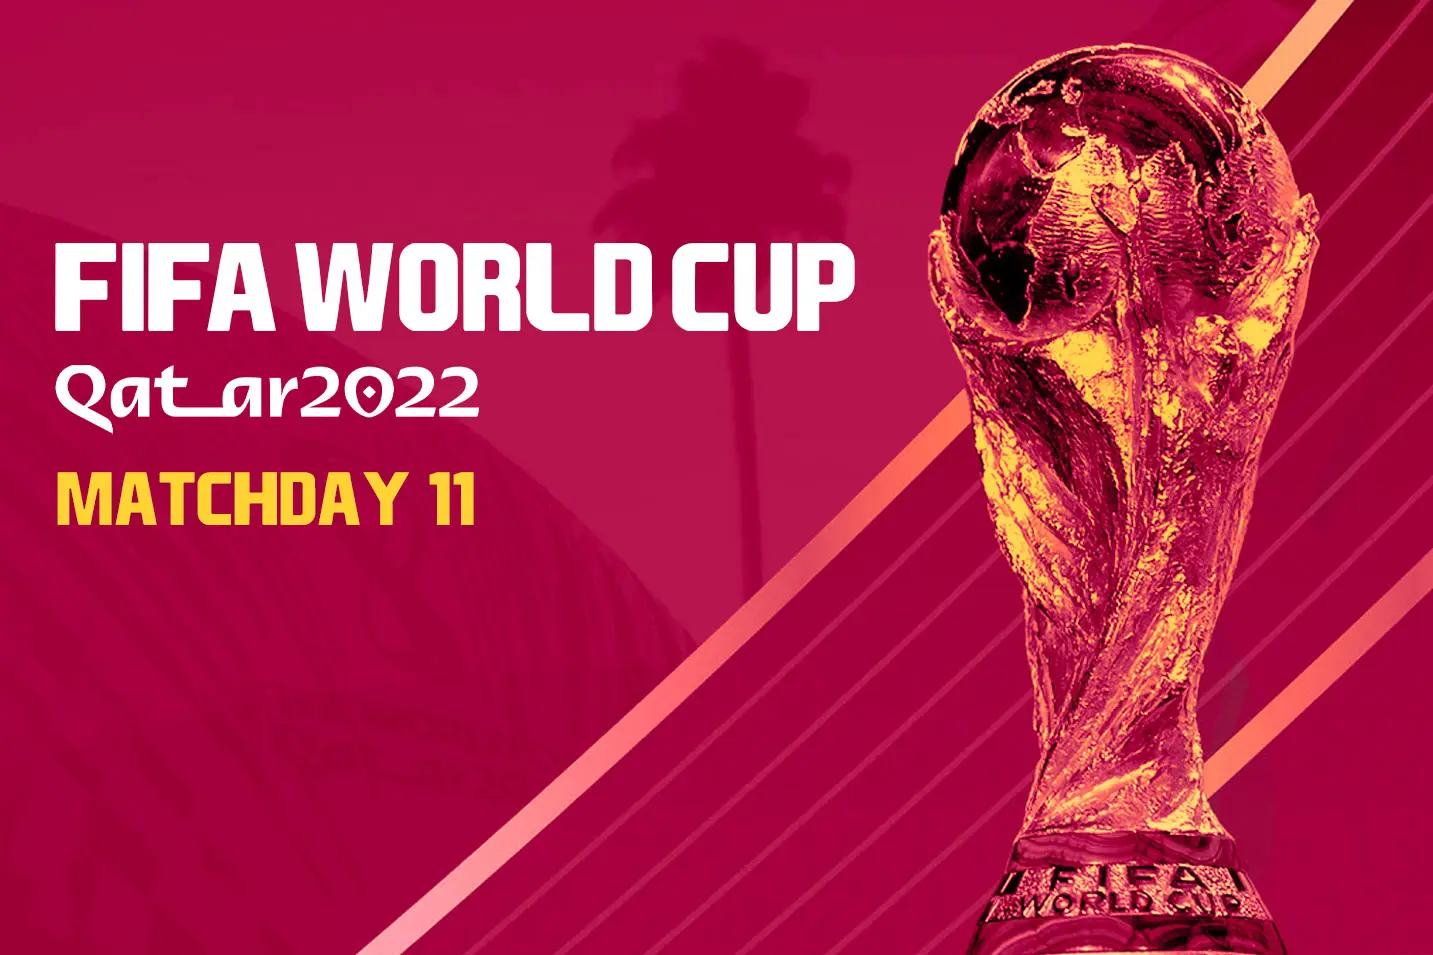 FIFA World Cup Matchday 11 preview